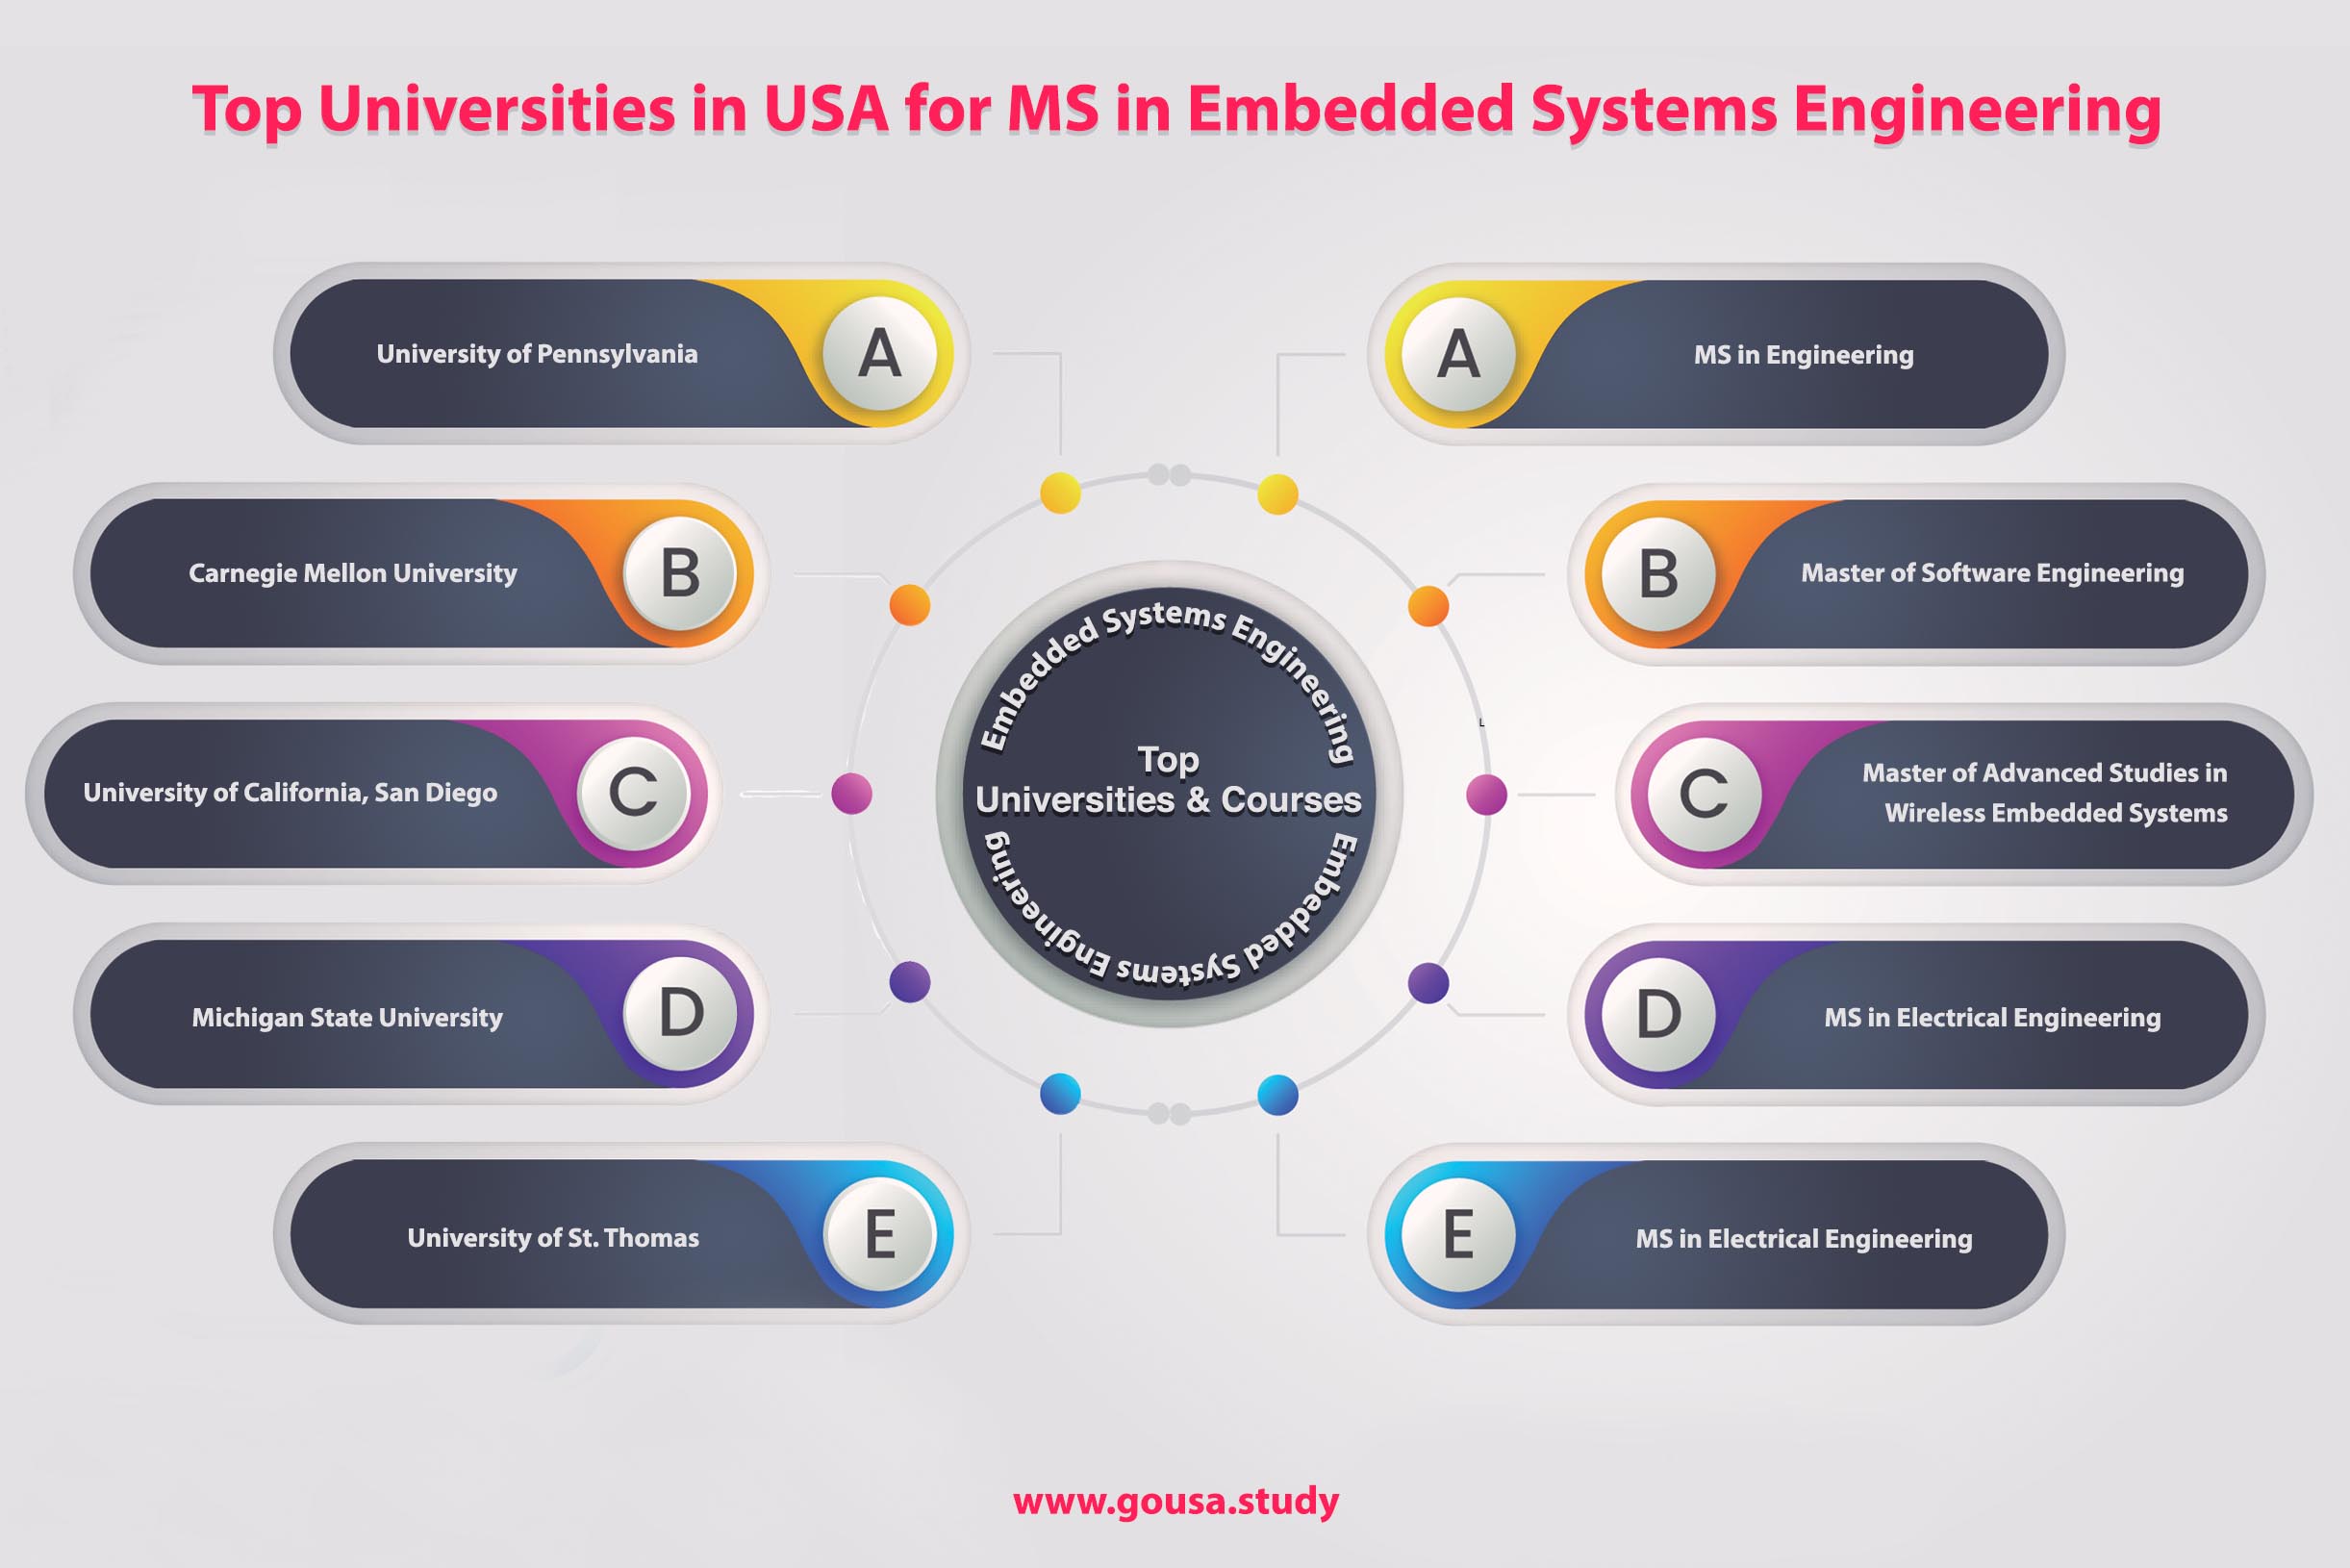 Top Universities in USA for MS in Embedded Systems Engineering